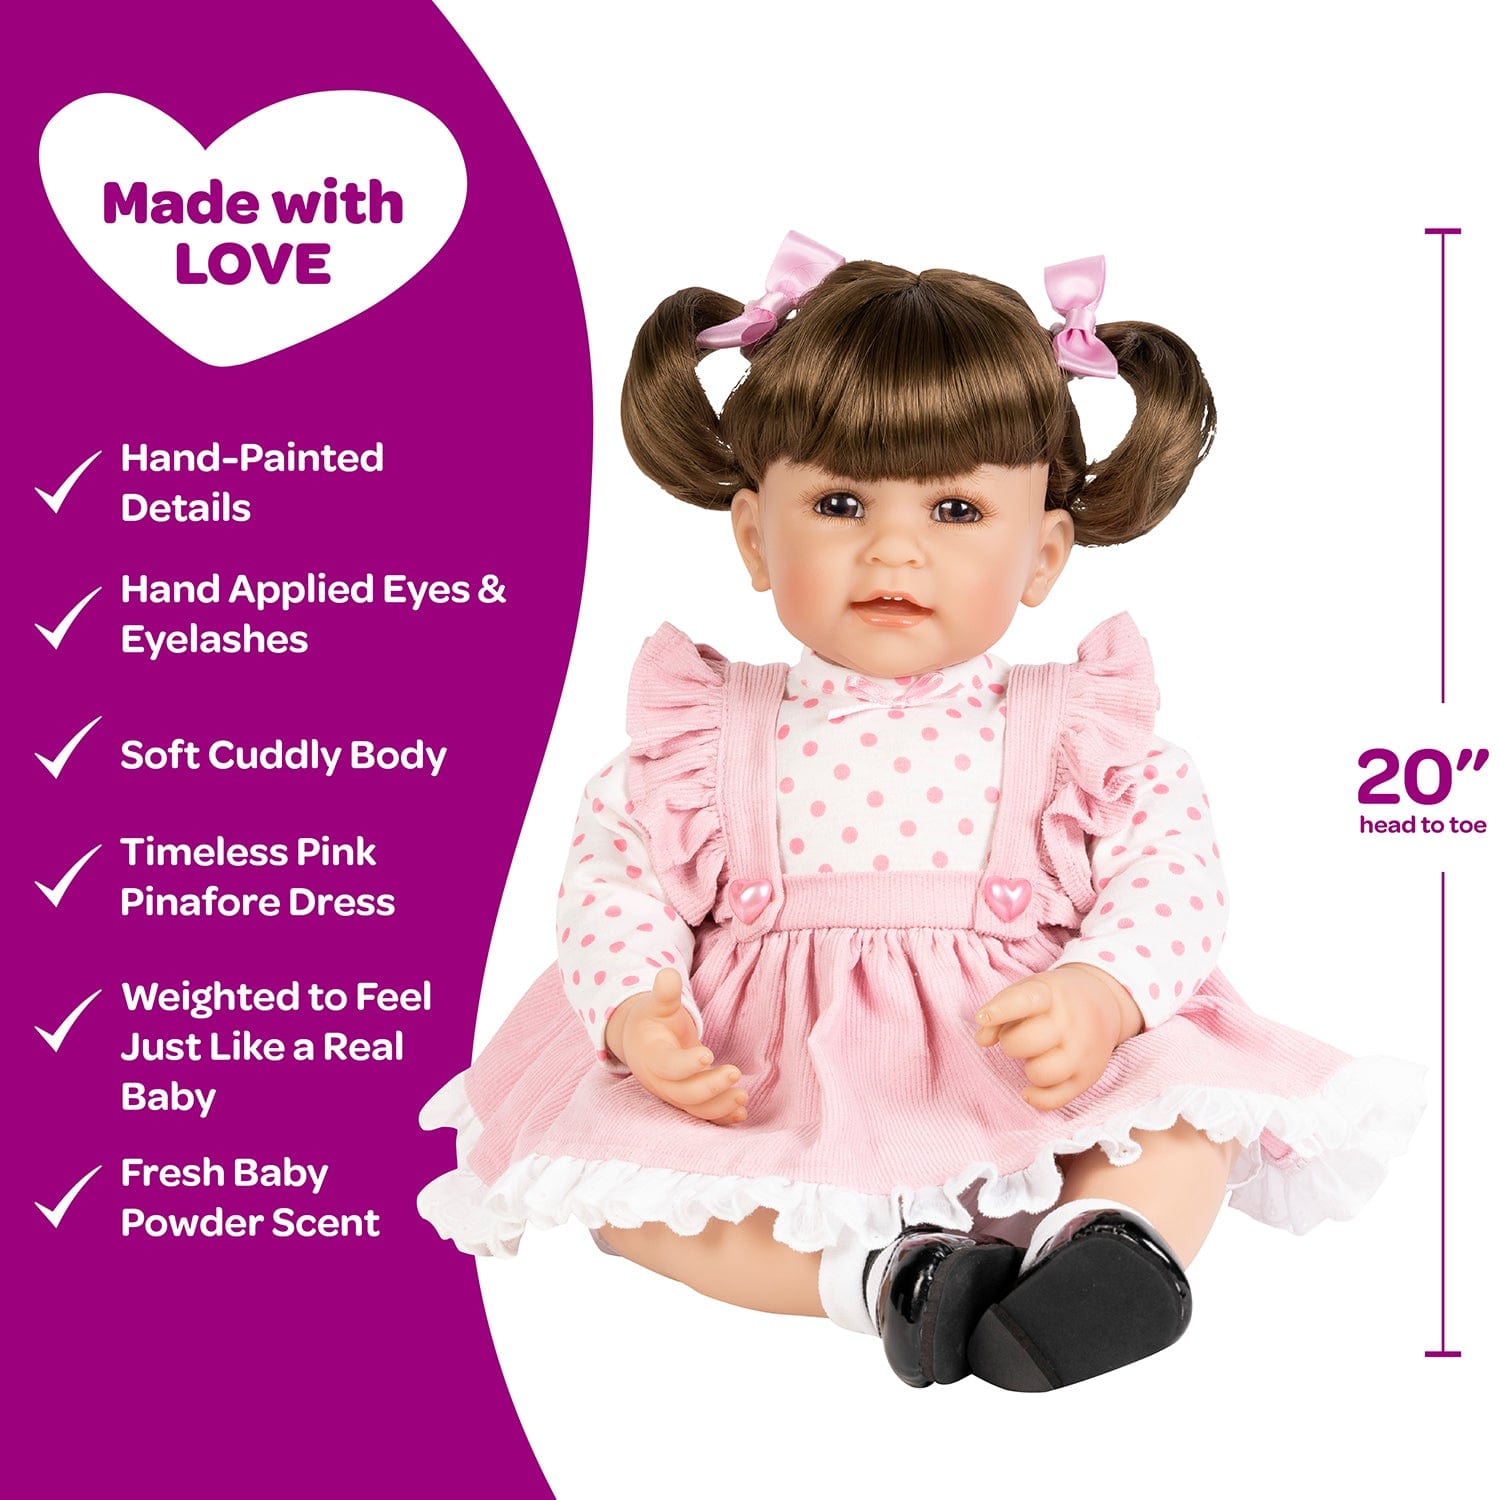 Adora Toddlertime Vintage Girl Baby Doll, Doll Clothes & Accessories Set